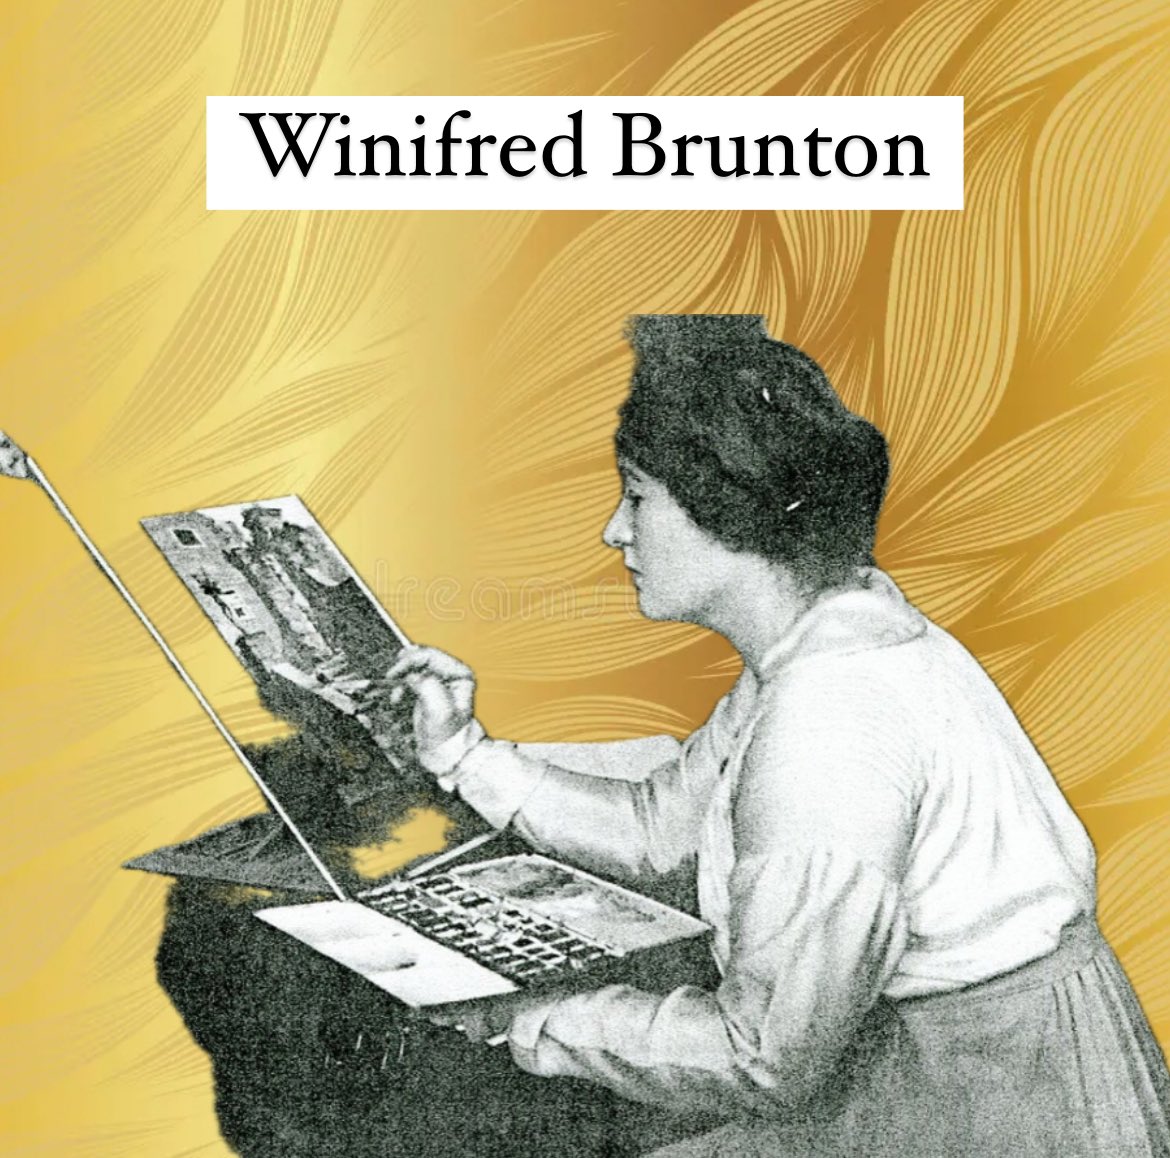 Today in HERstory 1880 – Winifred Brunton was born. She was an Egyptologist, painter, and illustrator; her portraits of Egyptian pharaohs were published in Kings and Queens of Ancient Egypt (1926). . . #herstory #womenshistory #todayinhistory